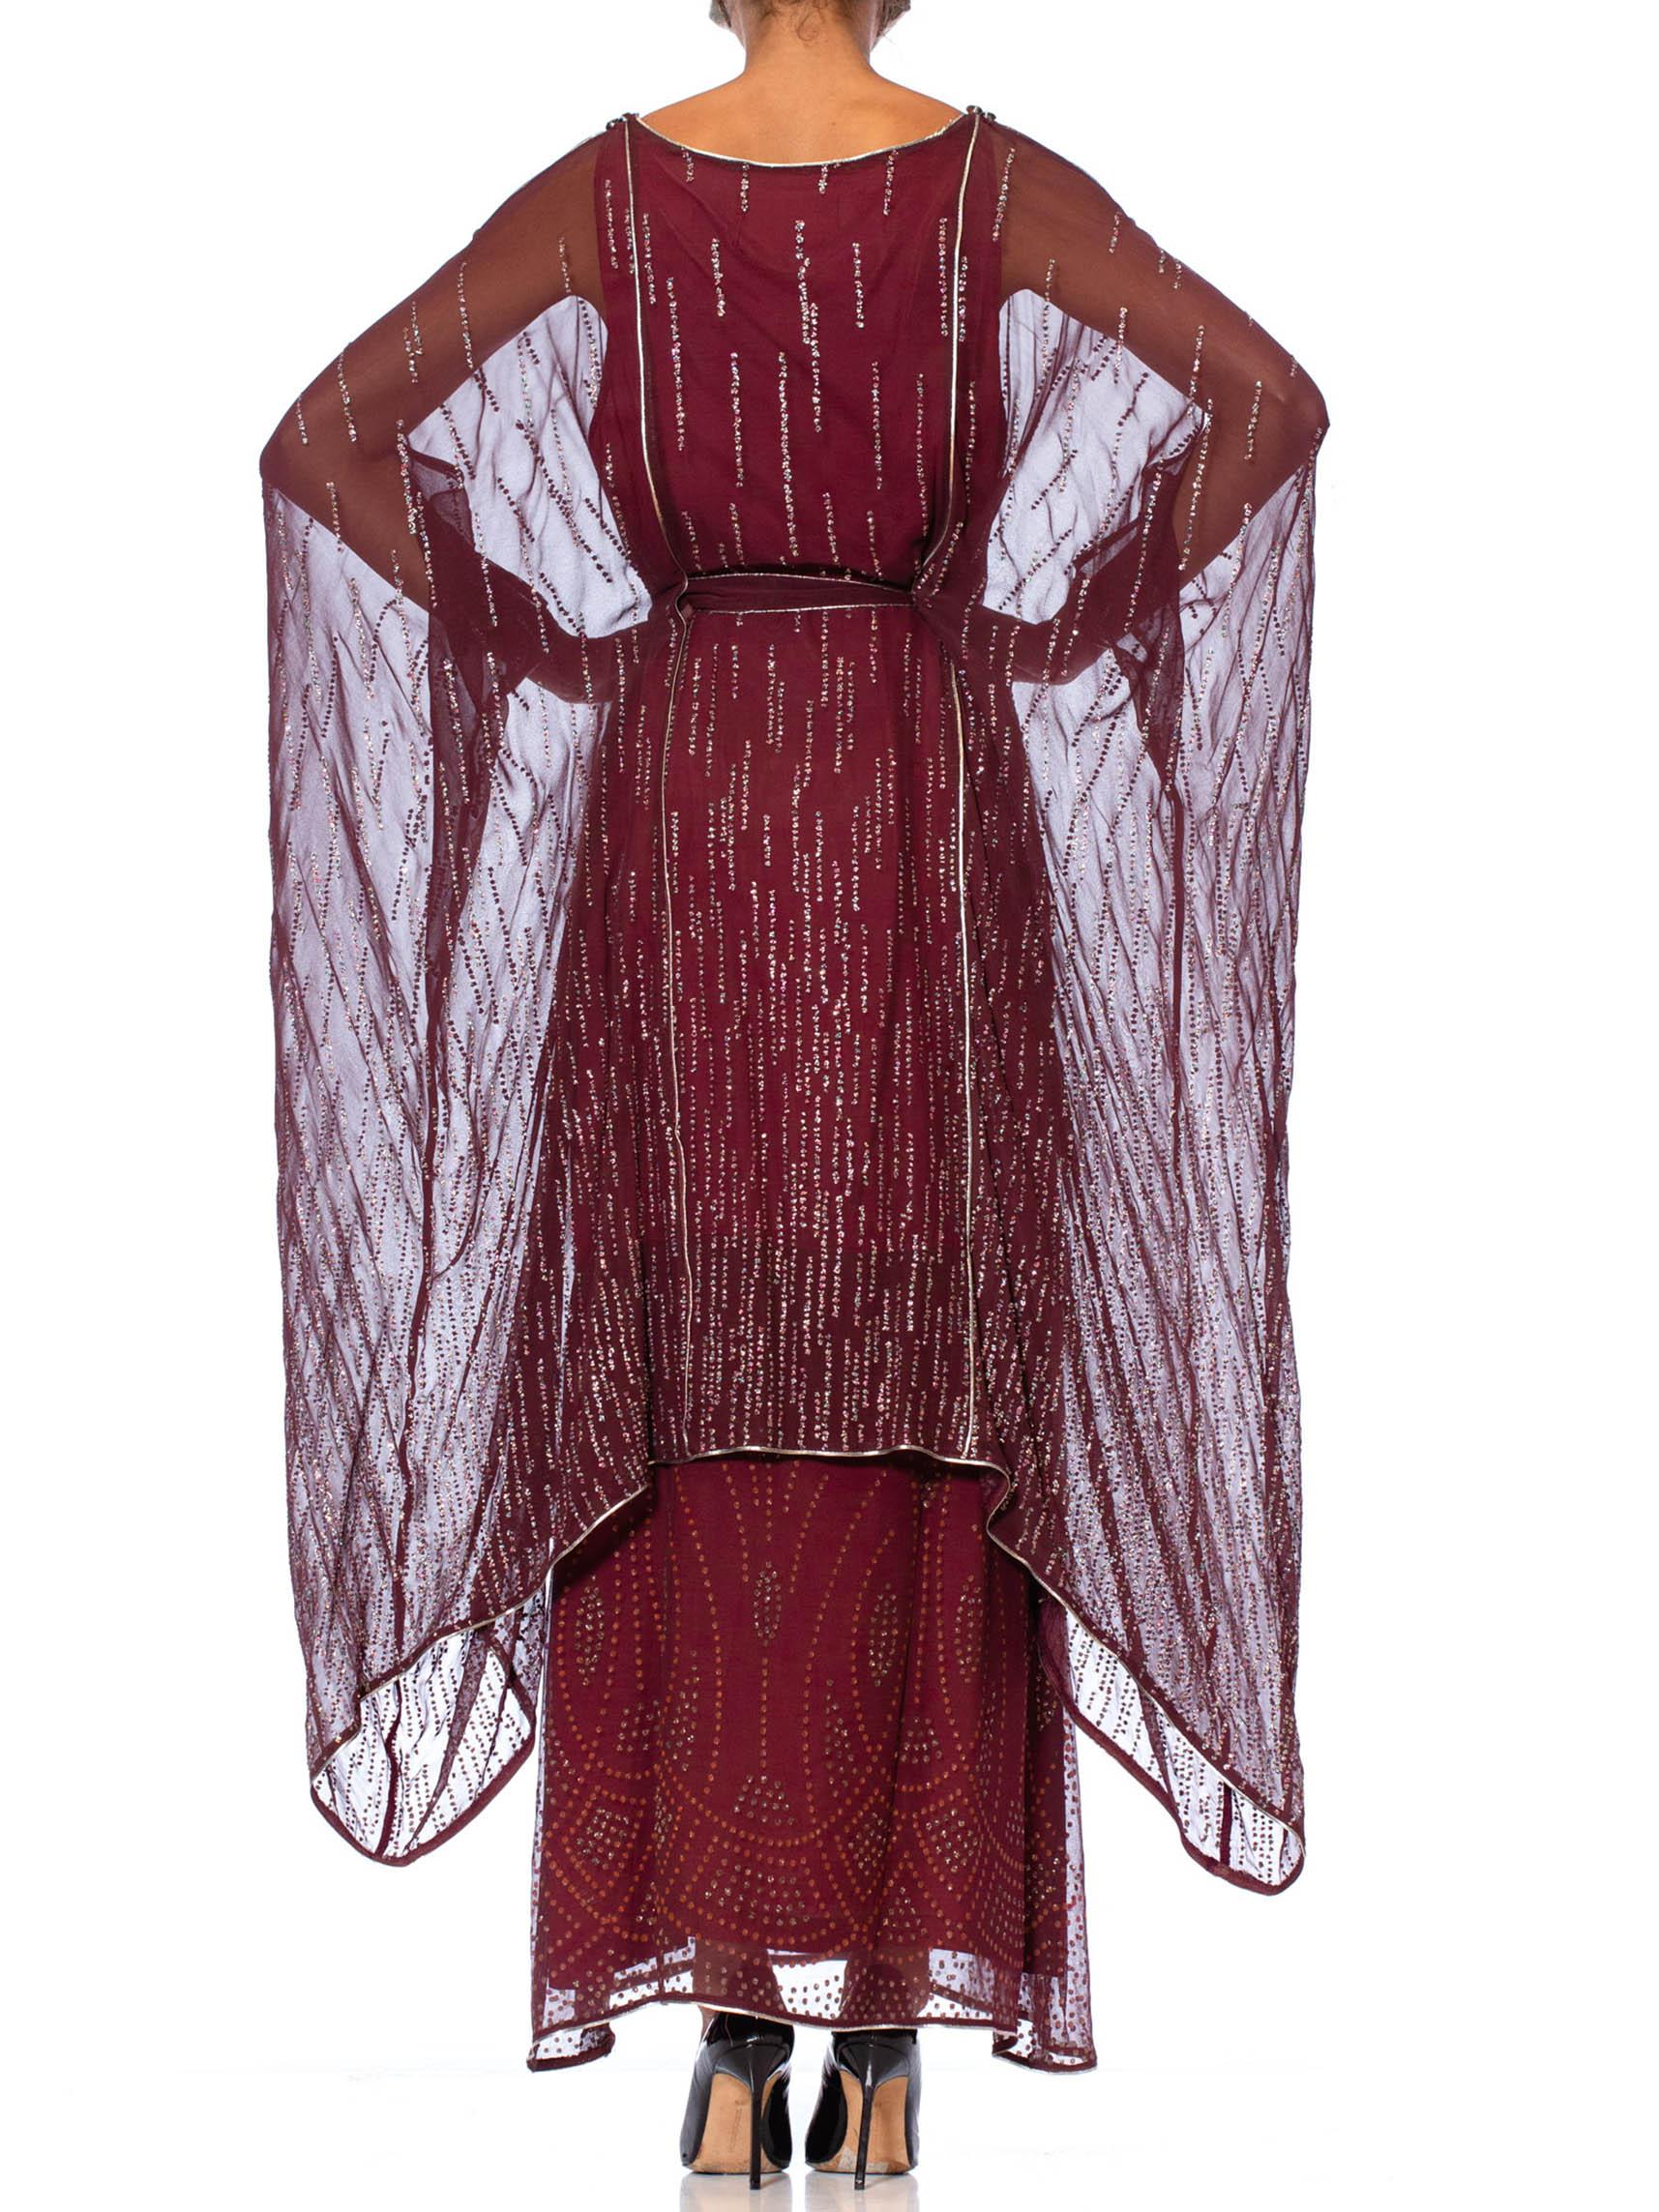 1970S JANICE WAINWRIGHT Maroon Rayon Chiffon Goddess Sleeve Kaftan Style Gown W In Excellent Condition For Sale In New York, NY